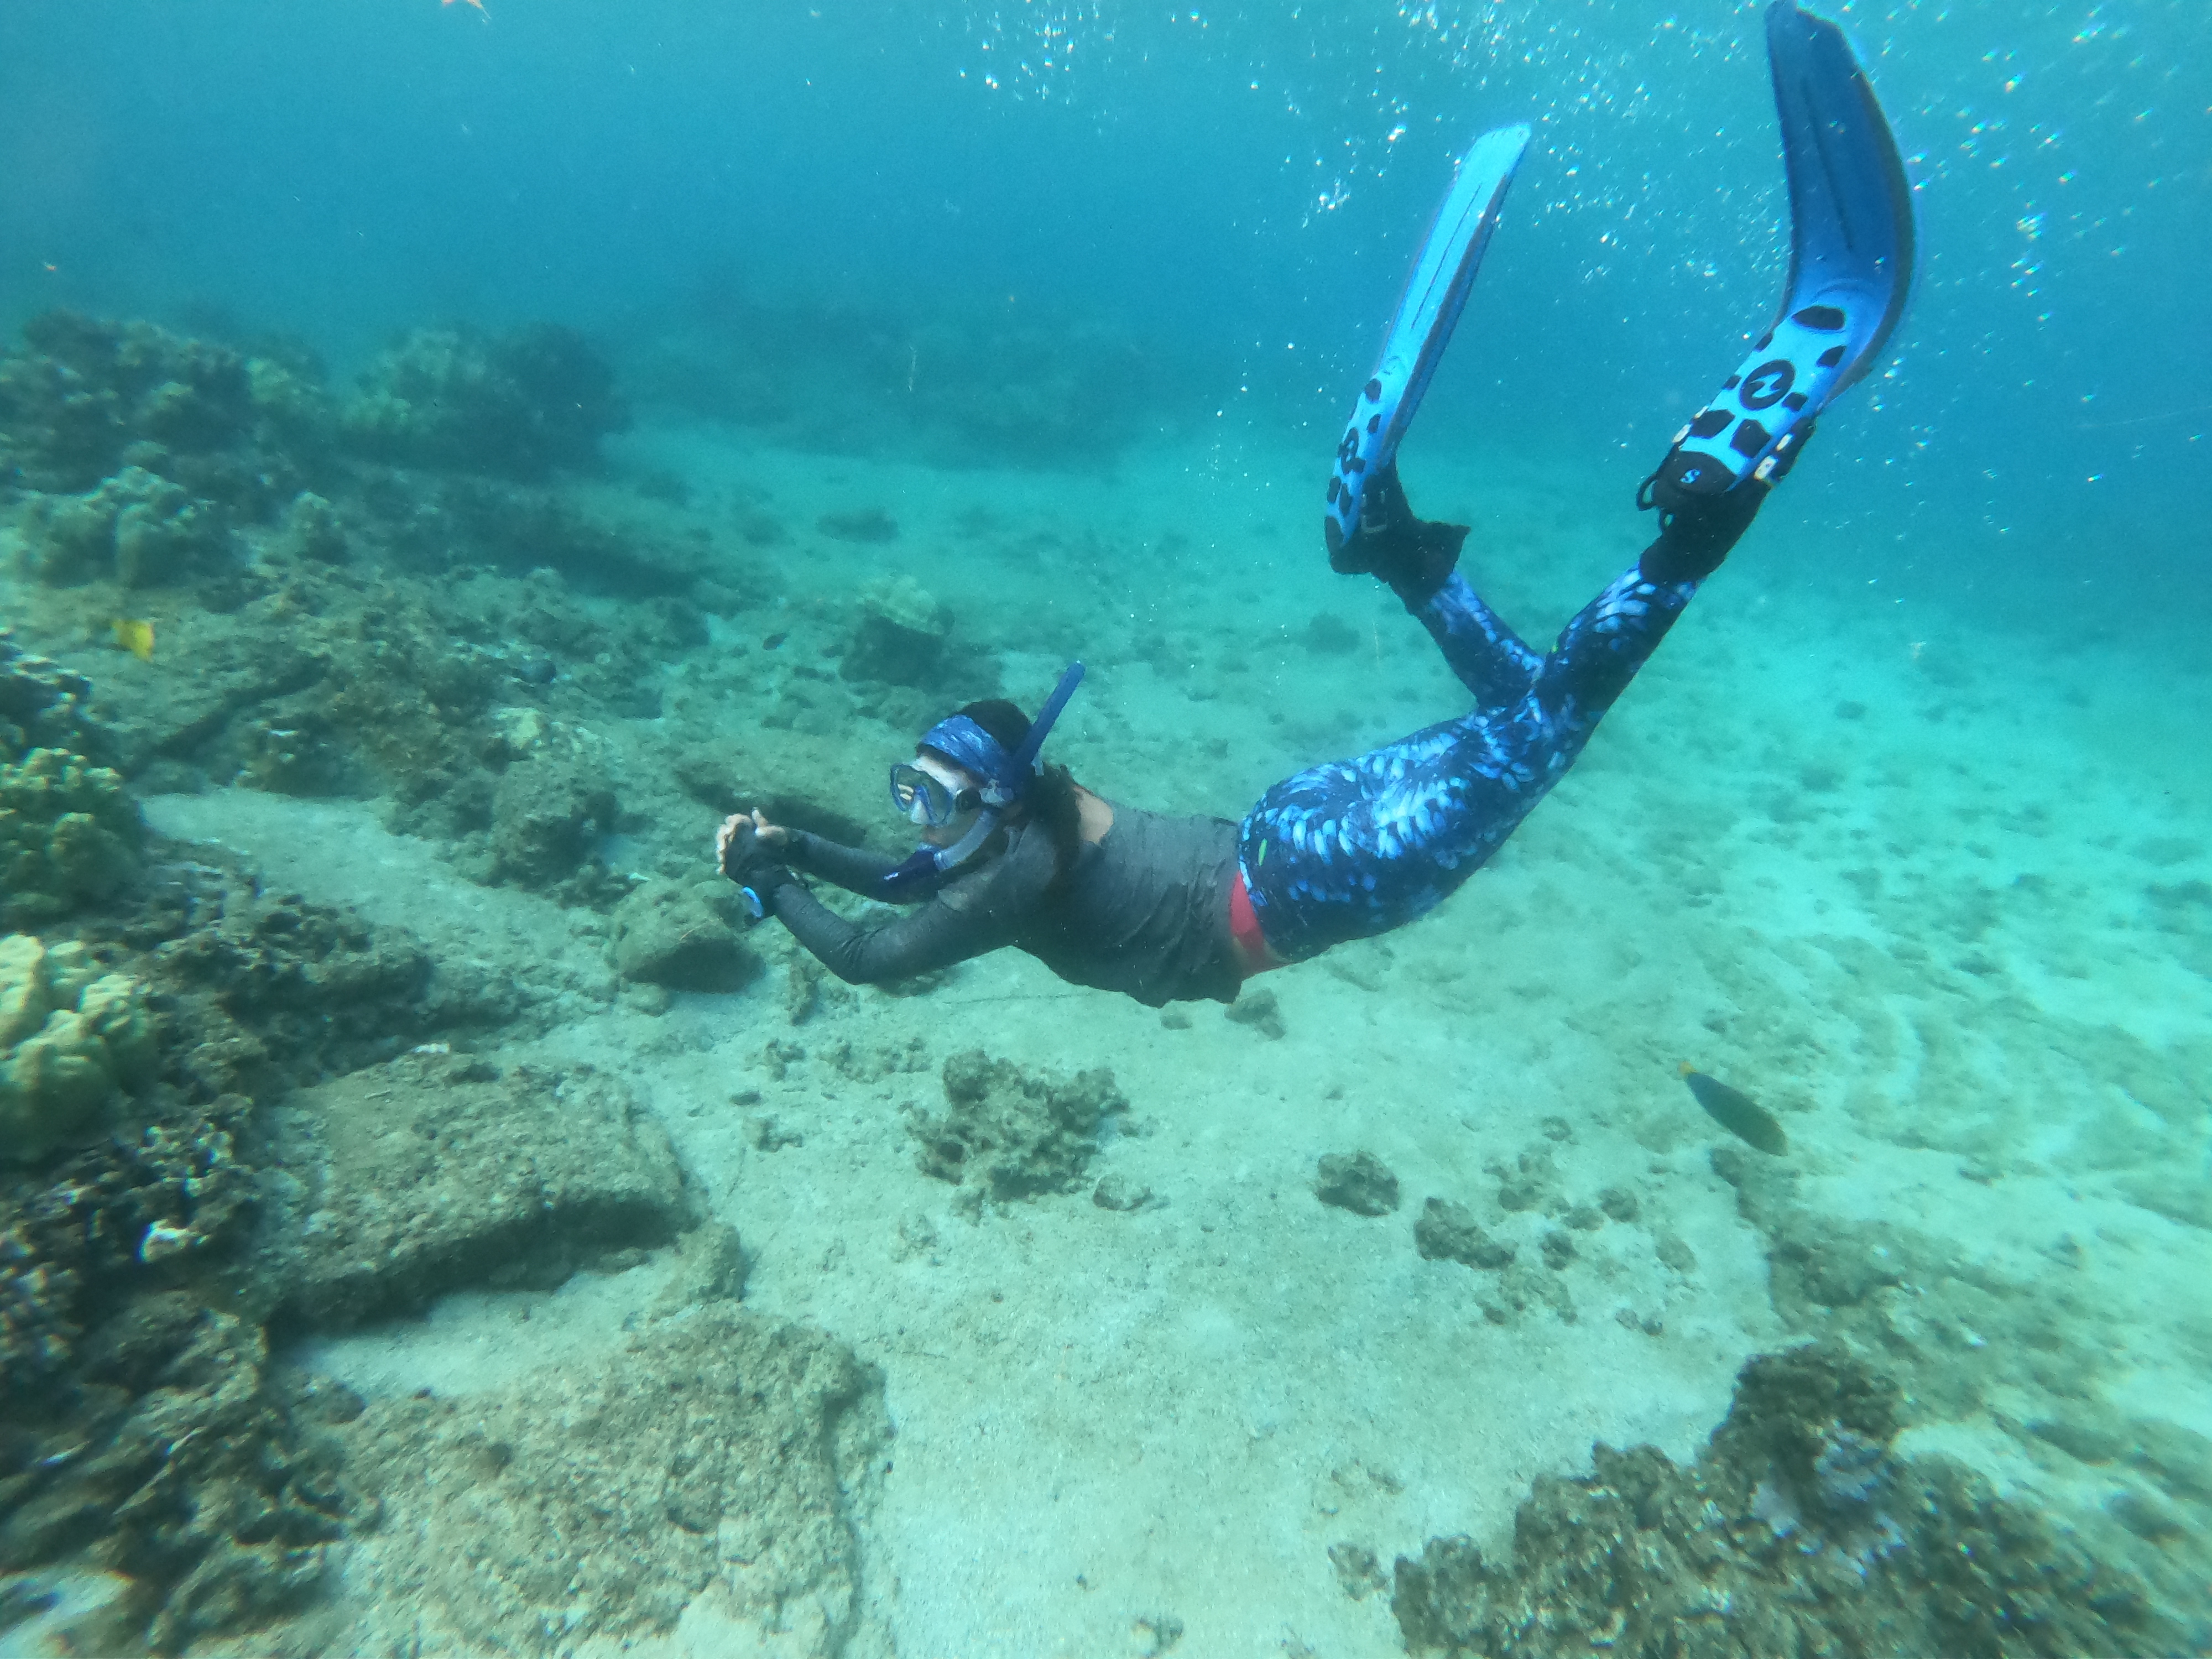 Mikayla diving in a reef, swimming with a couple fish wearing a snorkle and fins